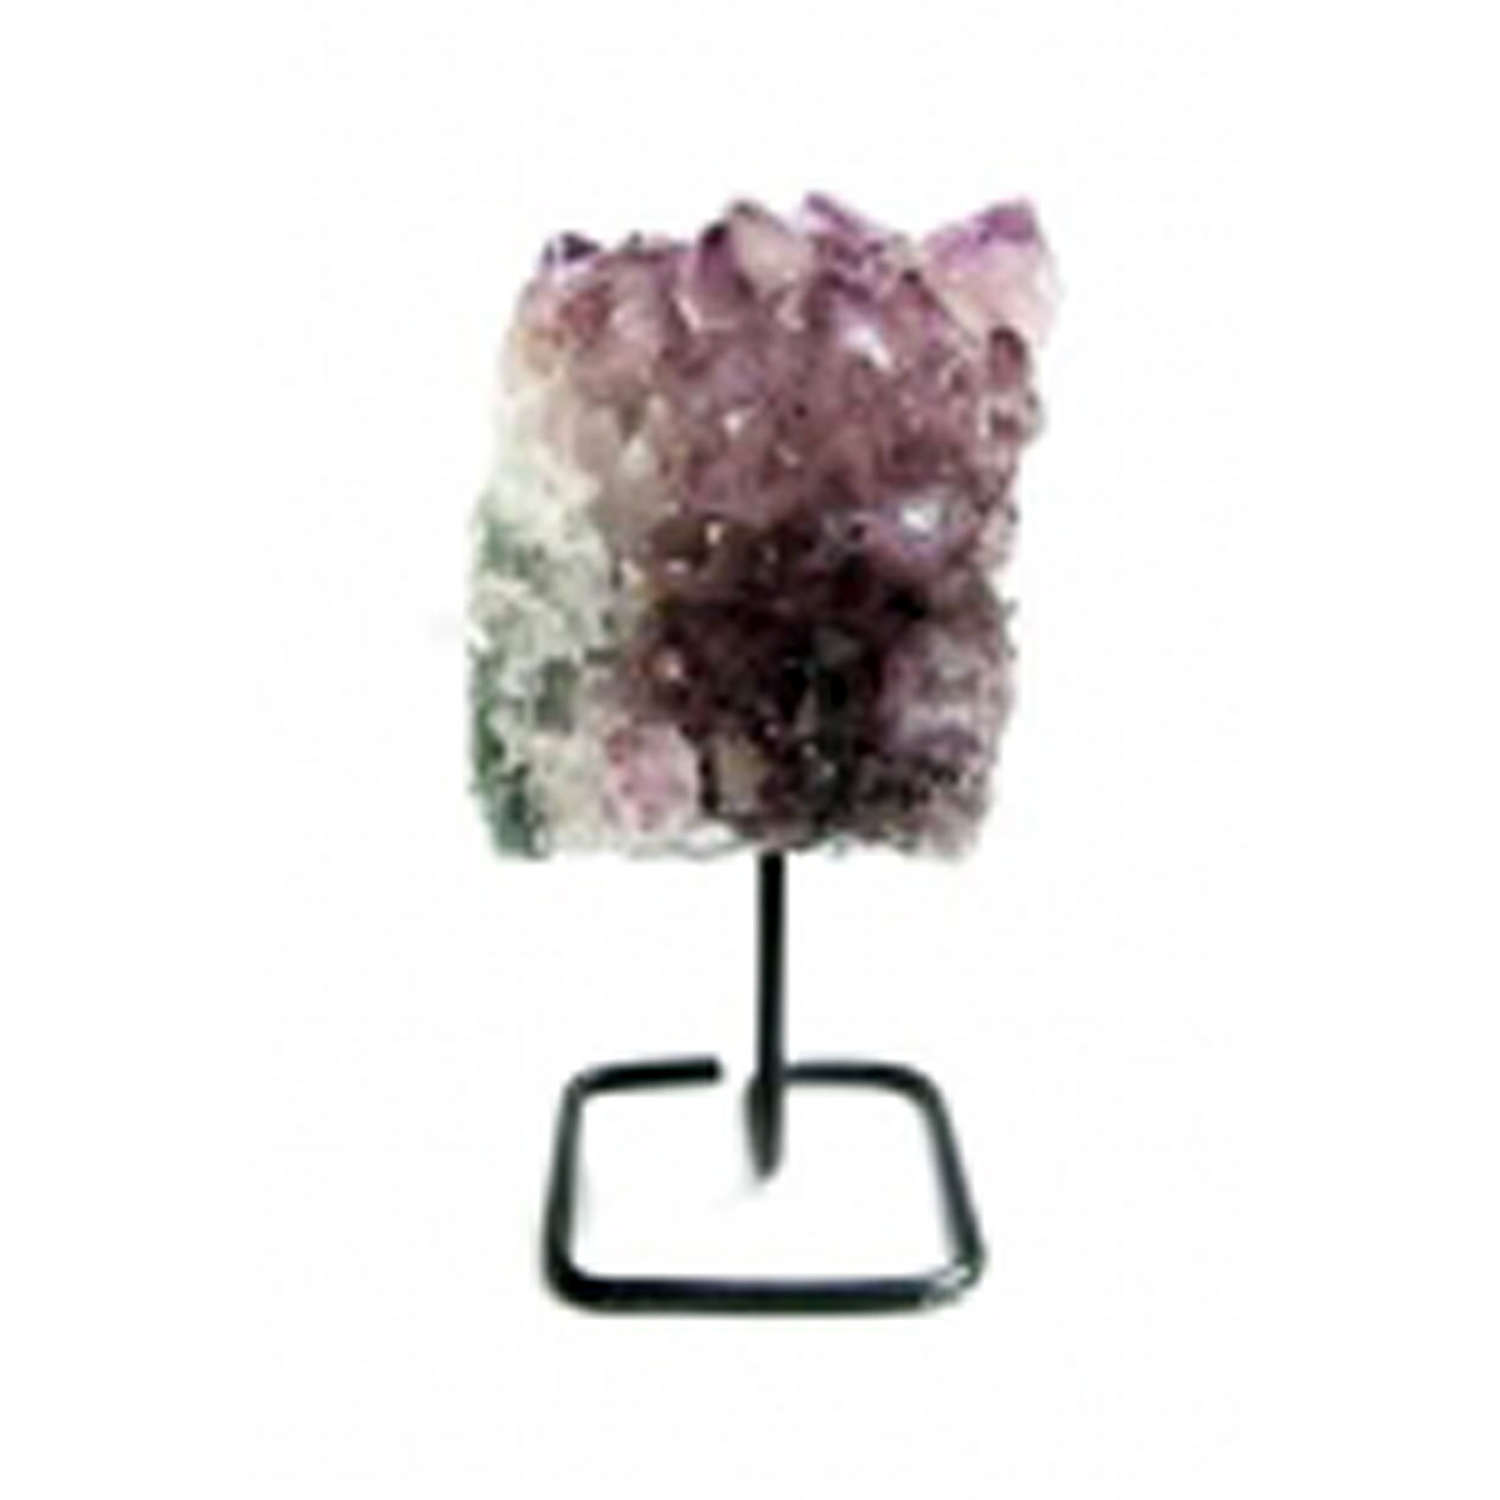 Small Amethyst Cluster on metal stand